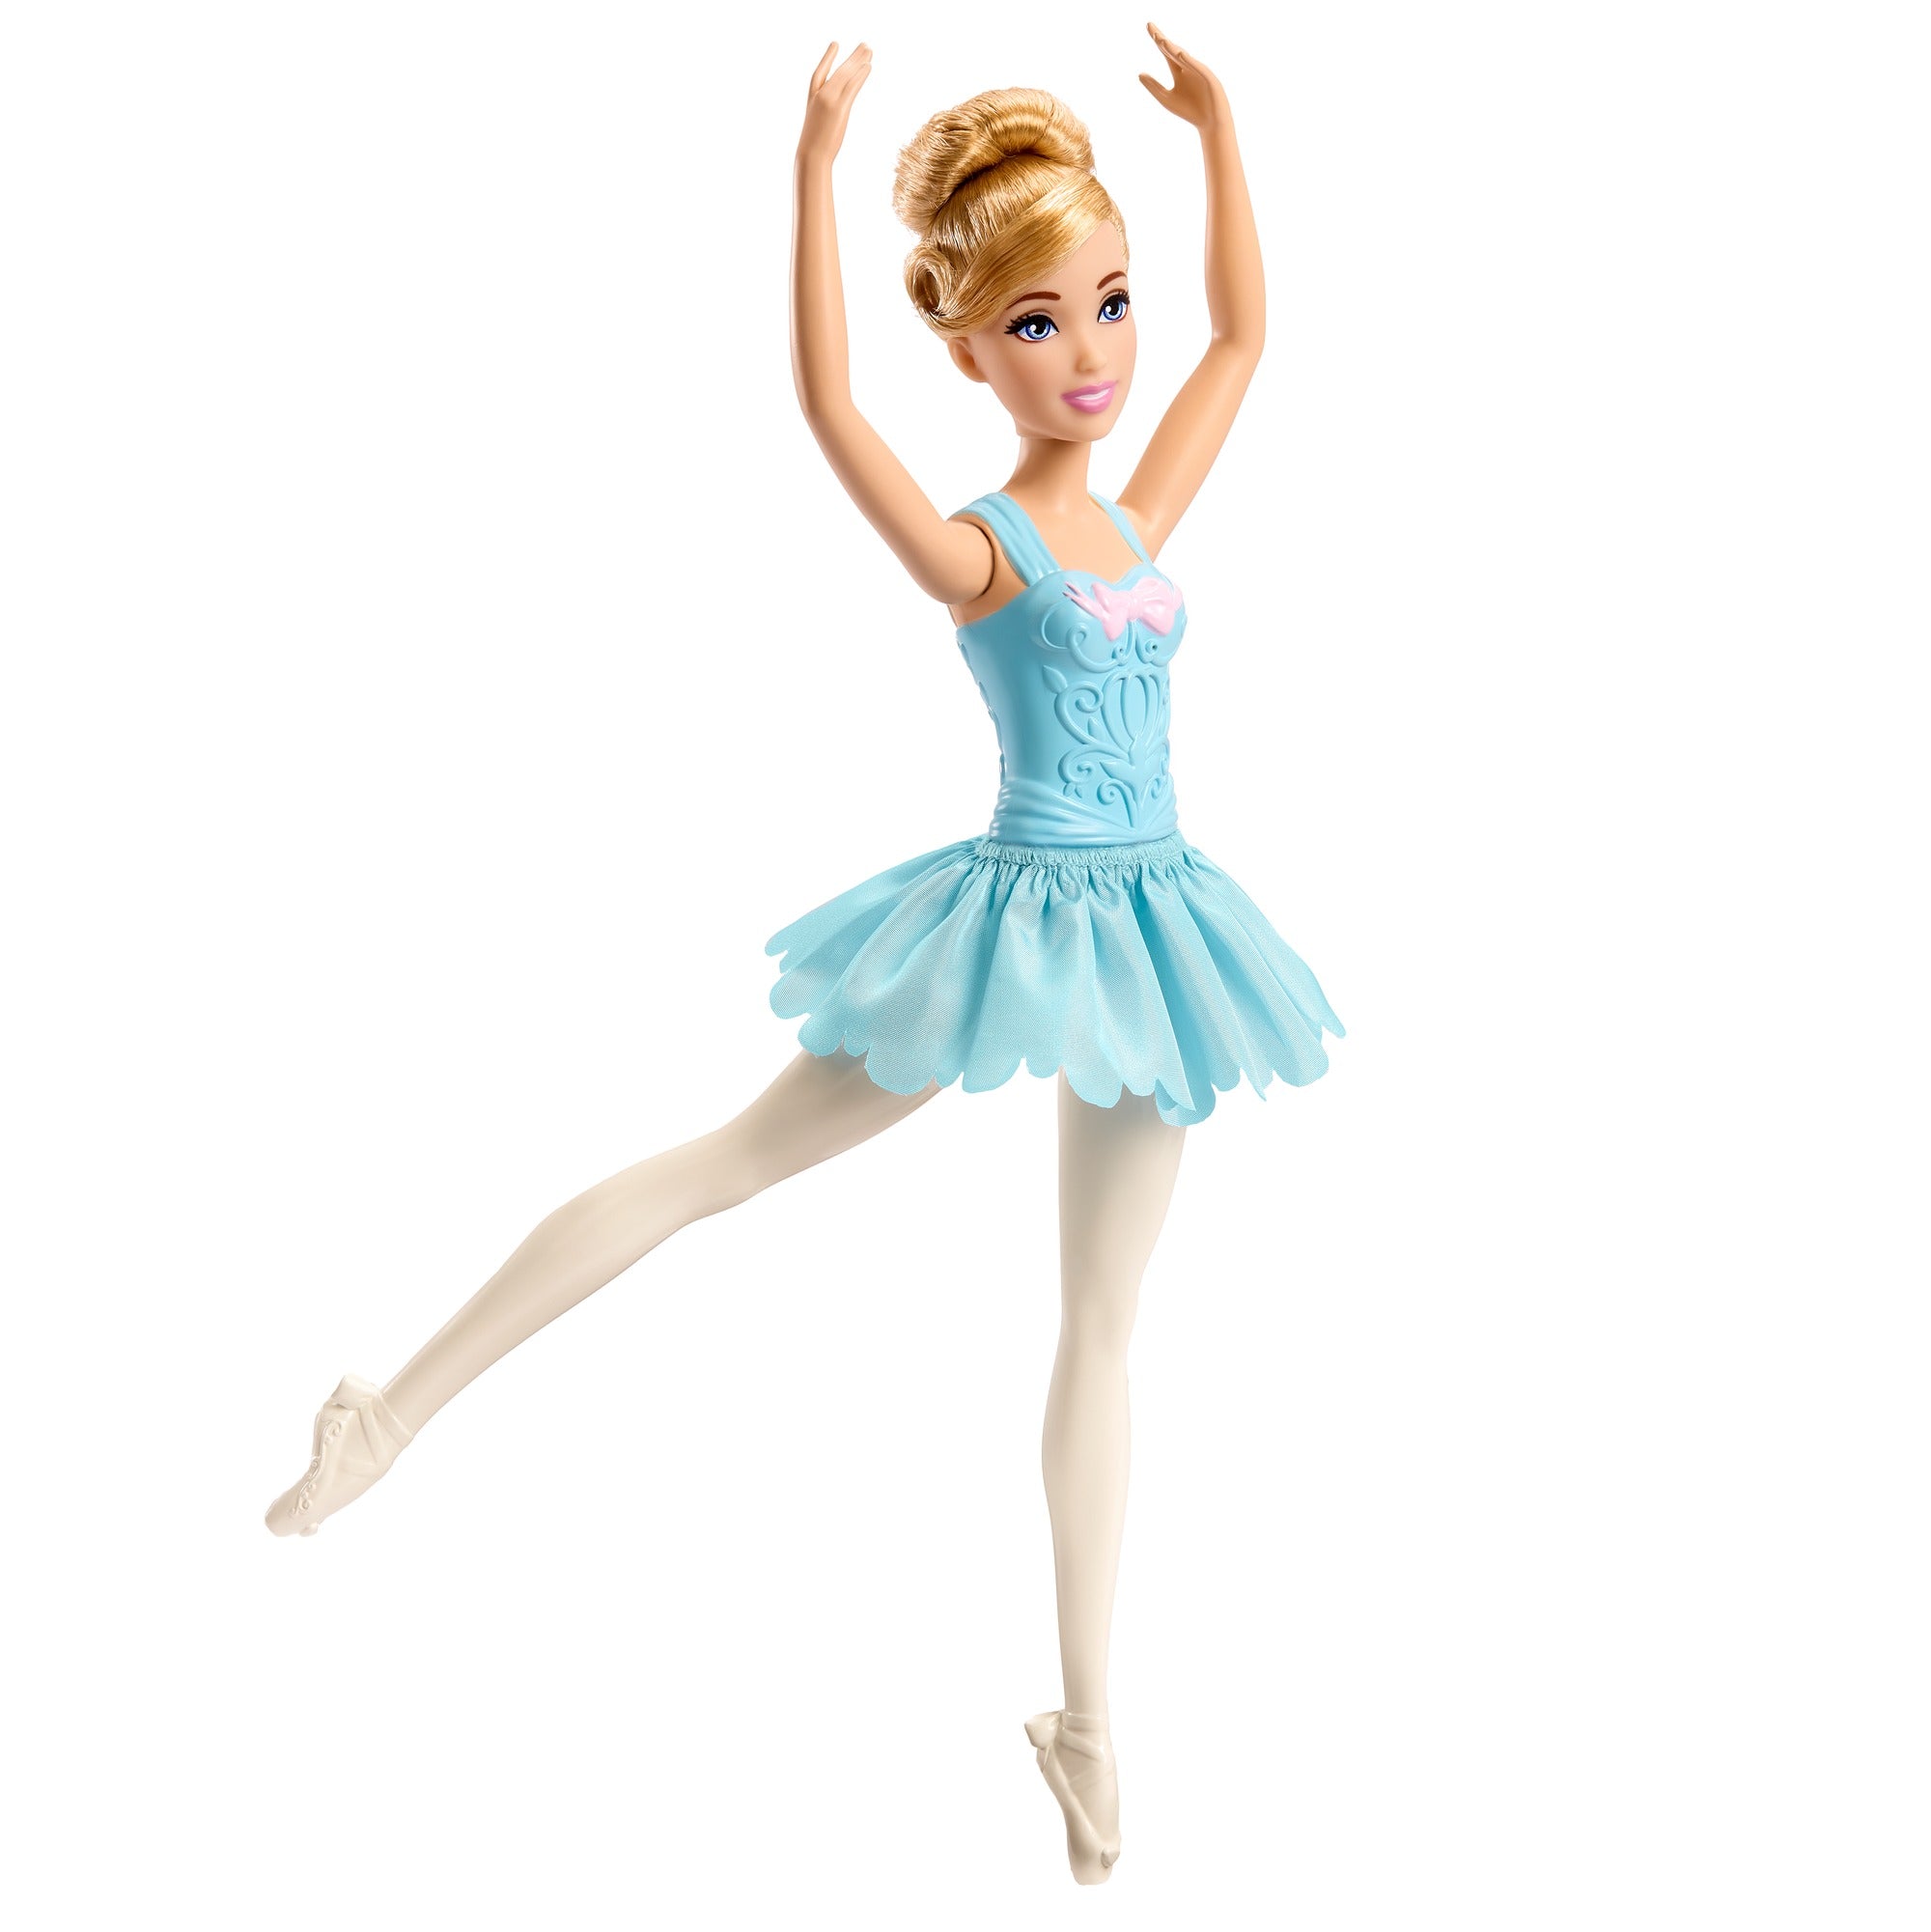 Disney Princess Posable Ballerina Cinderella Doll Inspired by the Disney Movie for Kids Ages 3+